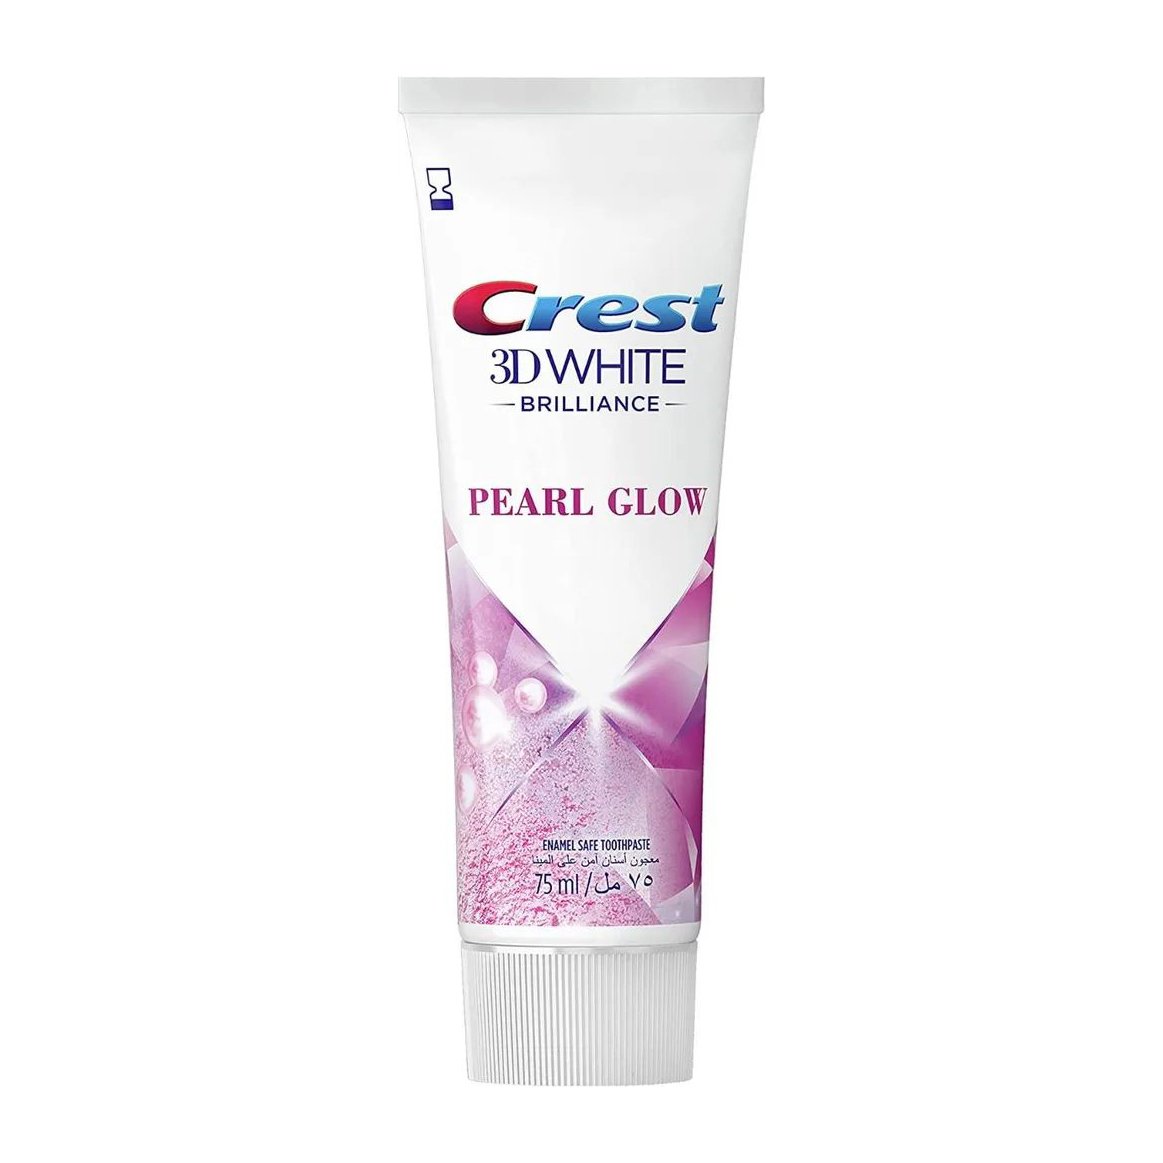 Crest 3D White Brilliance Pearl Glow Toothpaste - 75ml - Bloom Pharmacy